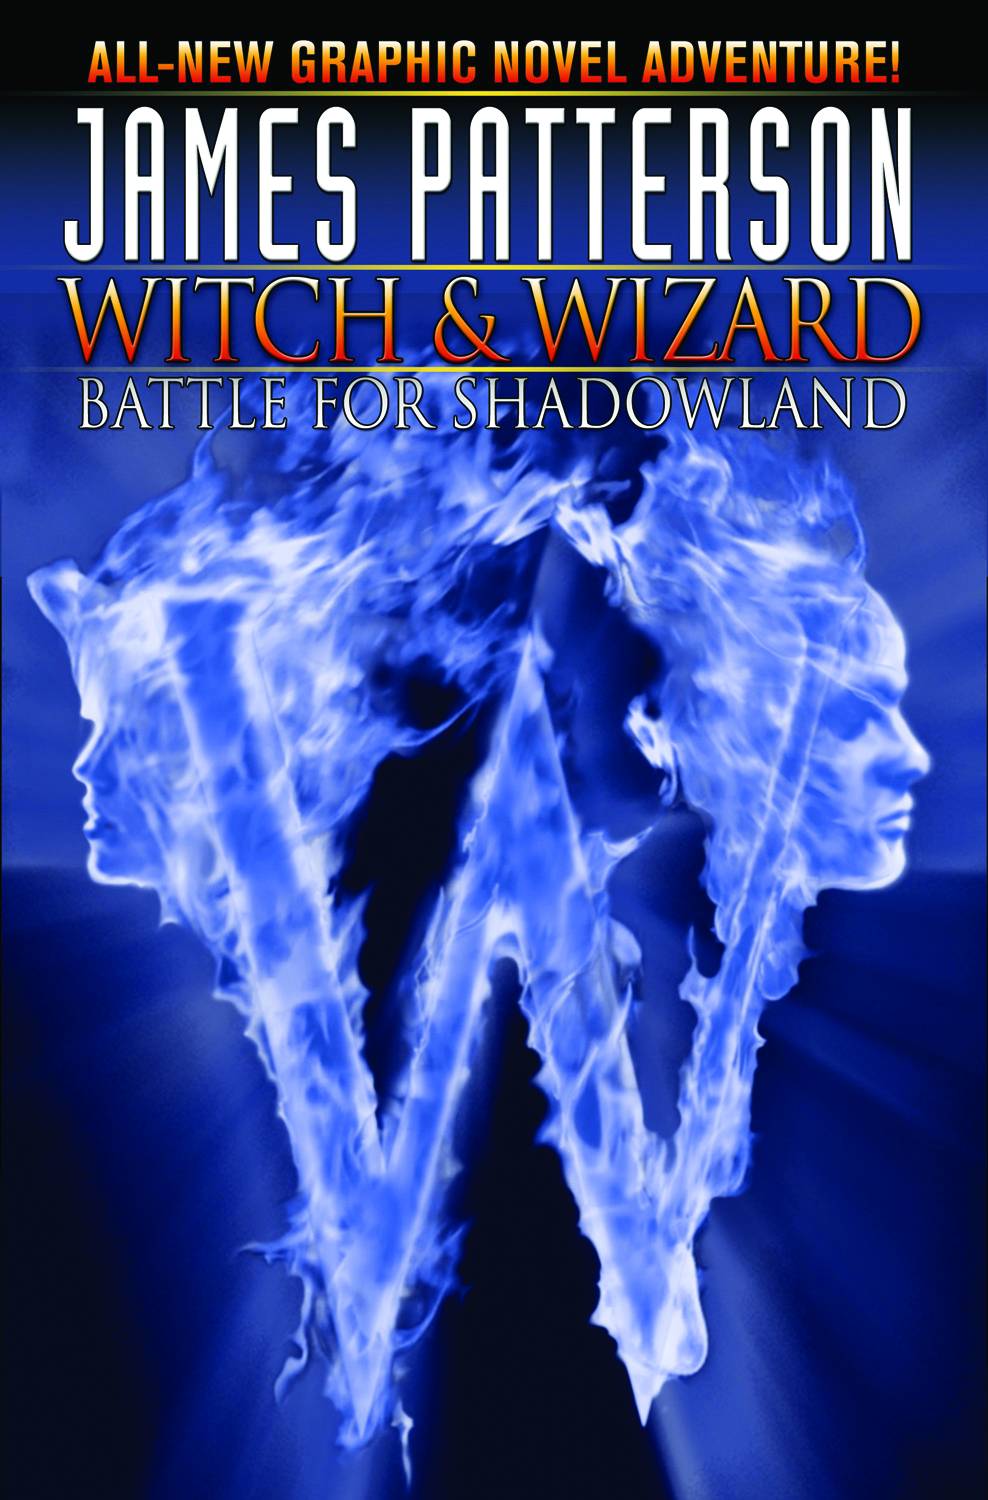 James Pattersons Witch & Wizard Graphic Novel Volume 1 Battle Shadowland